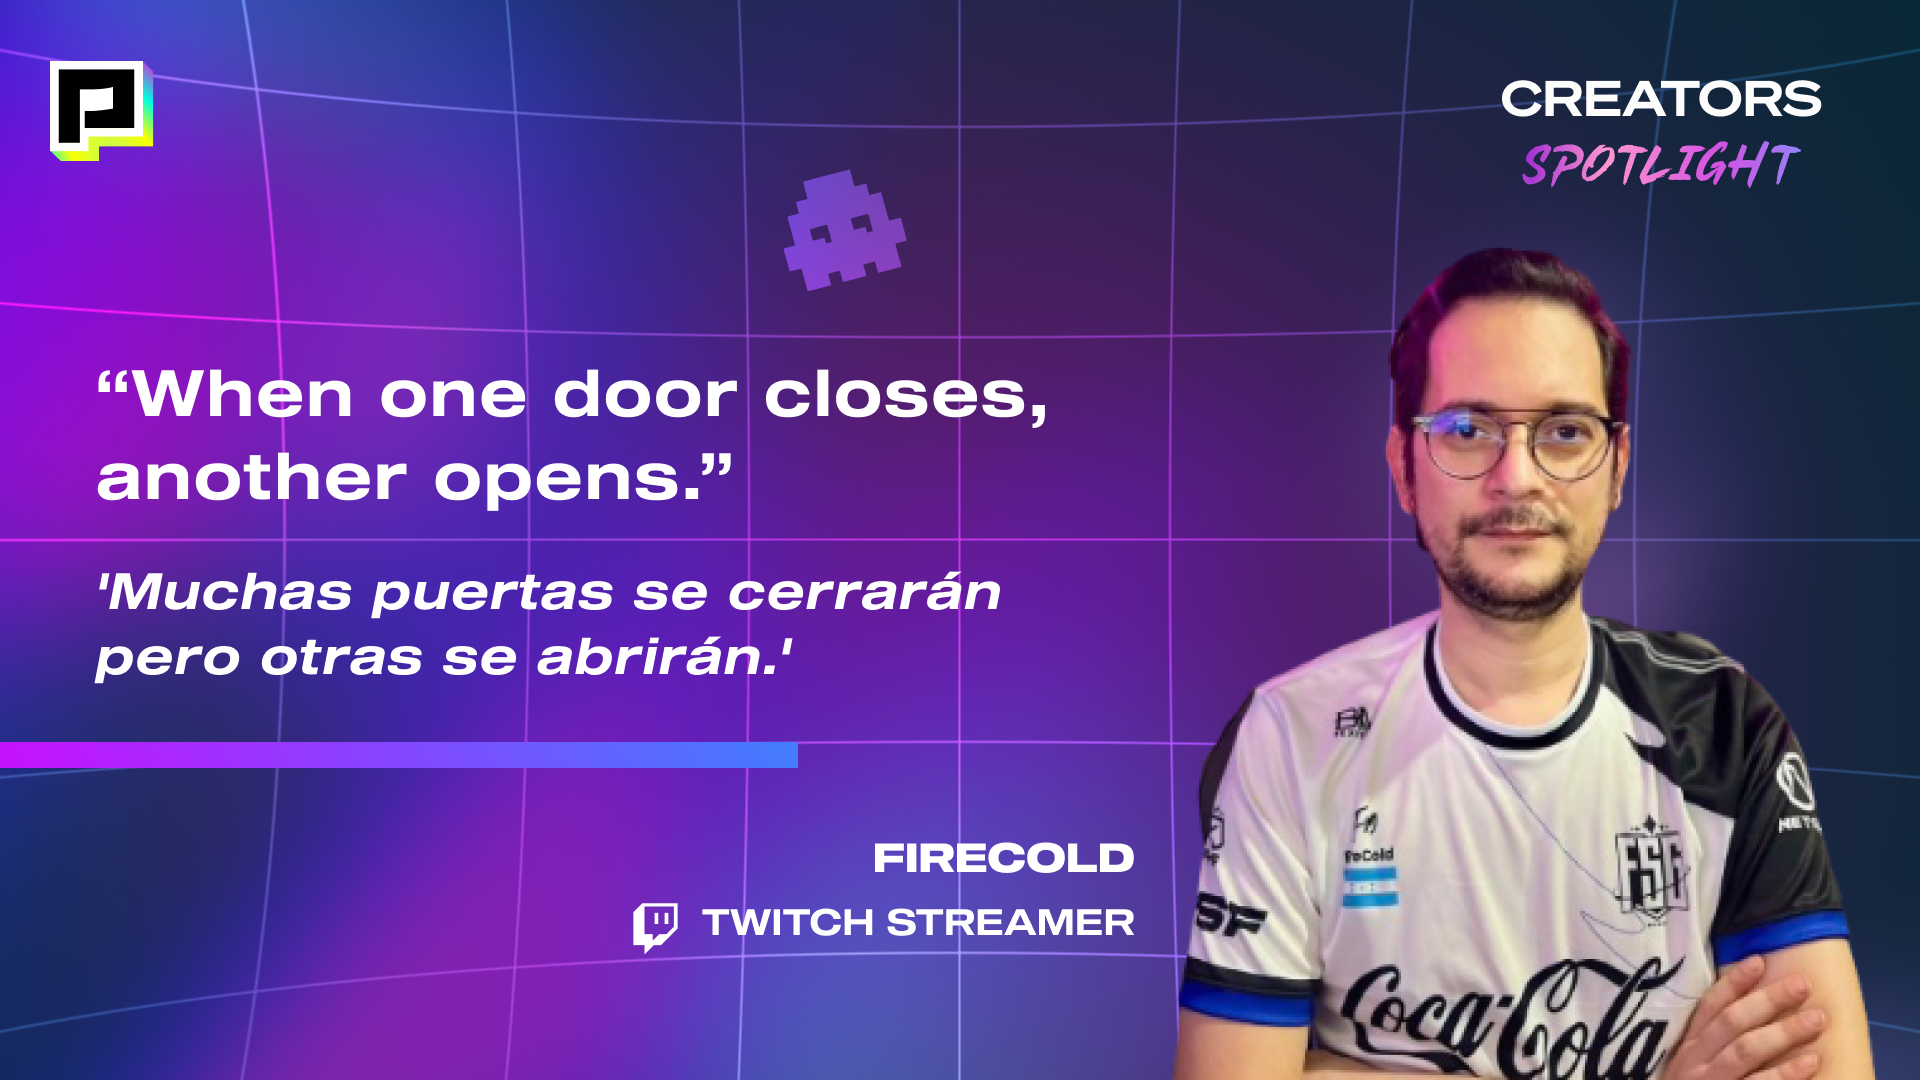 Image of Twitch Streamer, FIRECOLD with his quote, "When on e door closes, another opens."